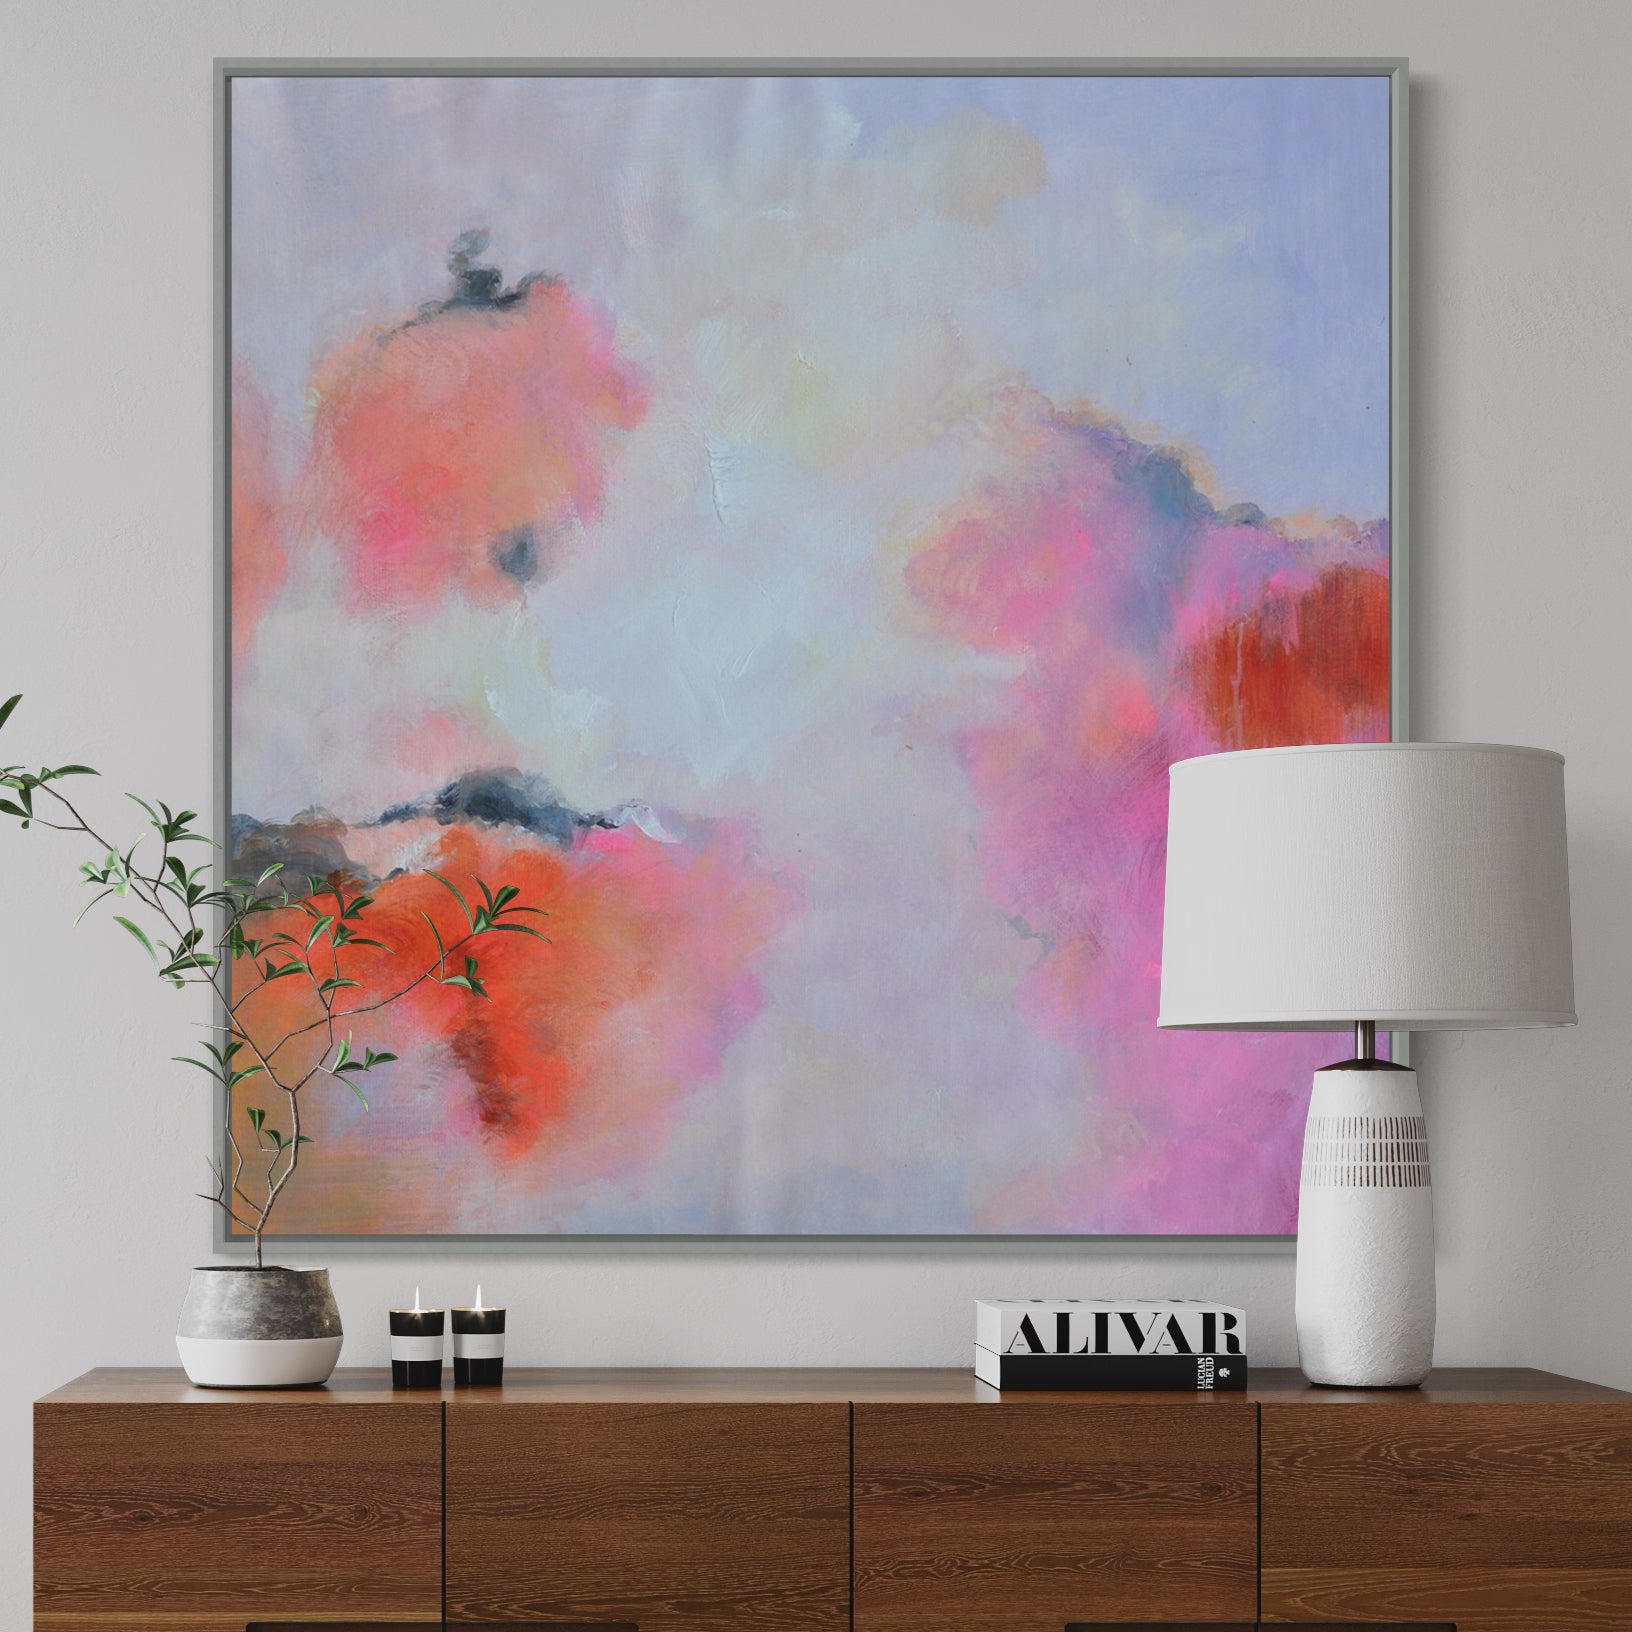 Cotton Candy, Gallery Wrap (With Bleed) / 120x120cm